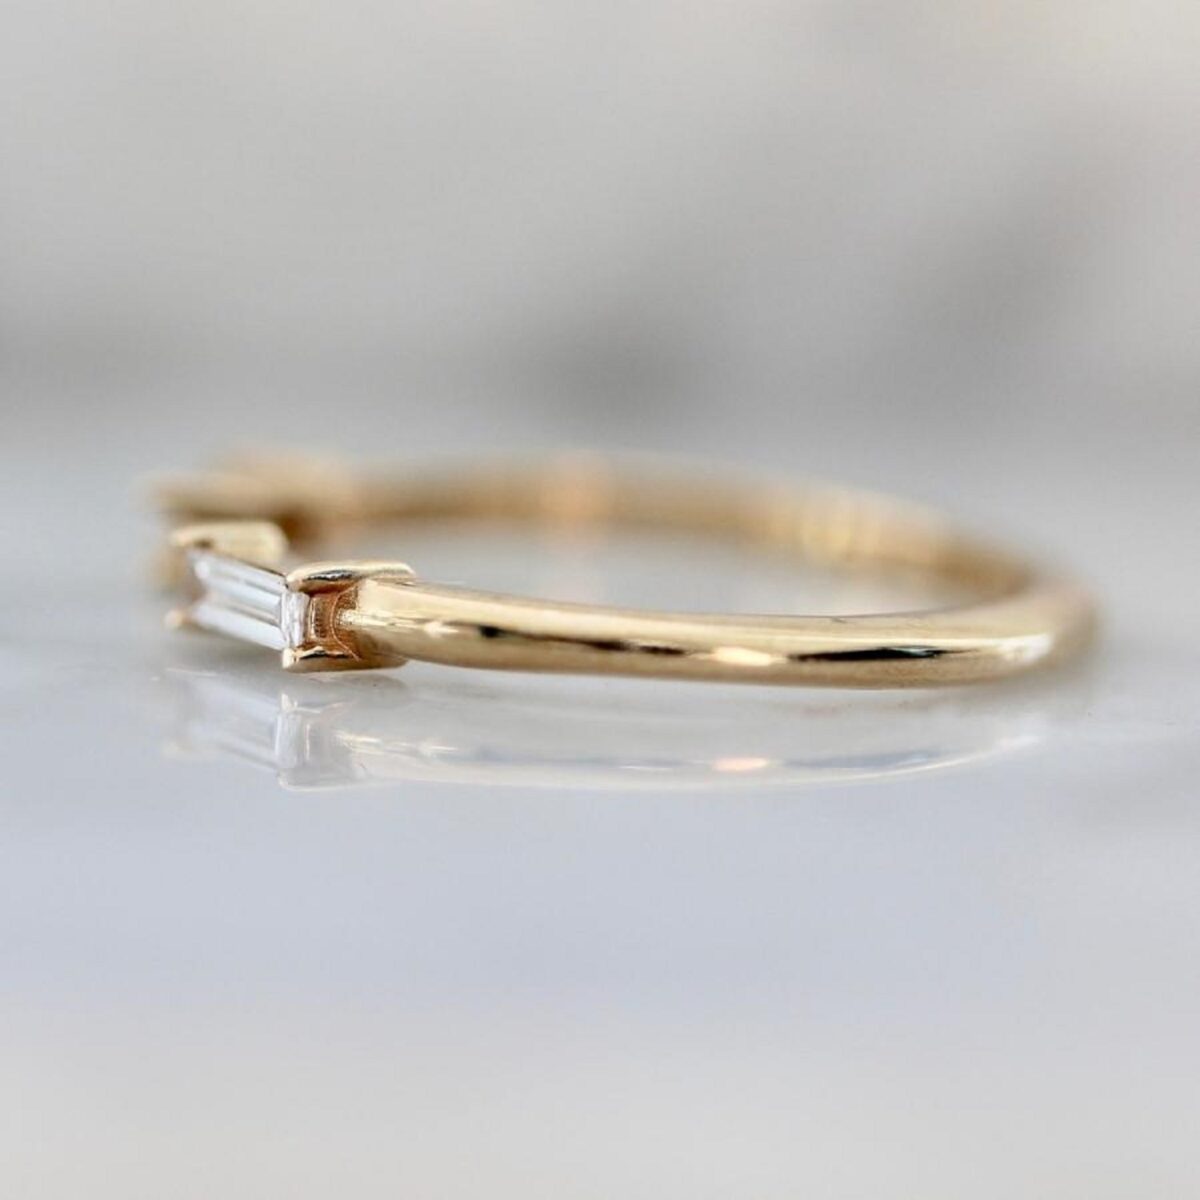 Baguette cut lab grown diamond open gap wedding stackable wedding band crafted in 14k yellow gold